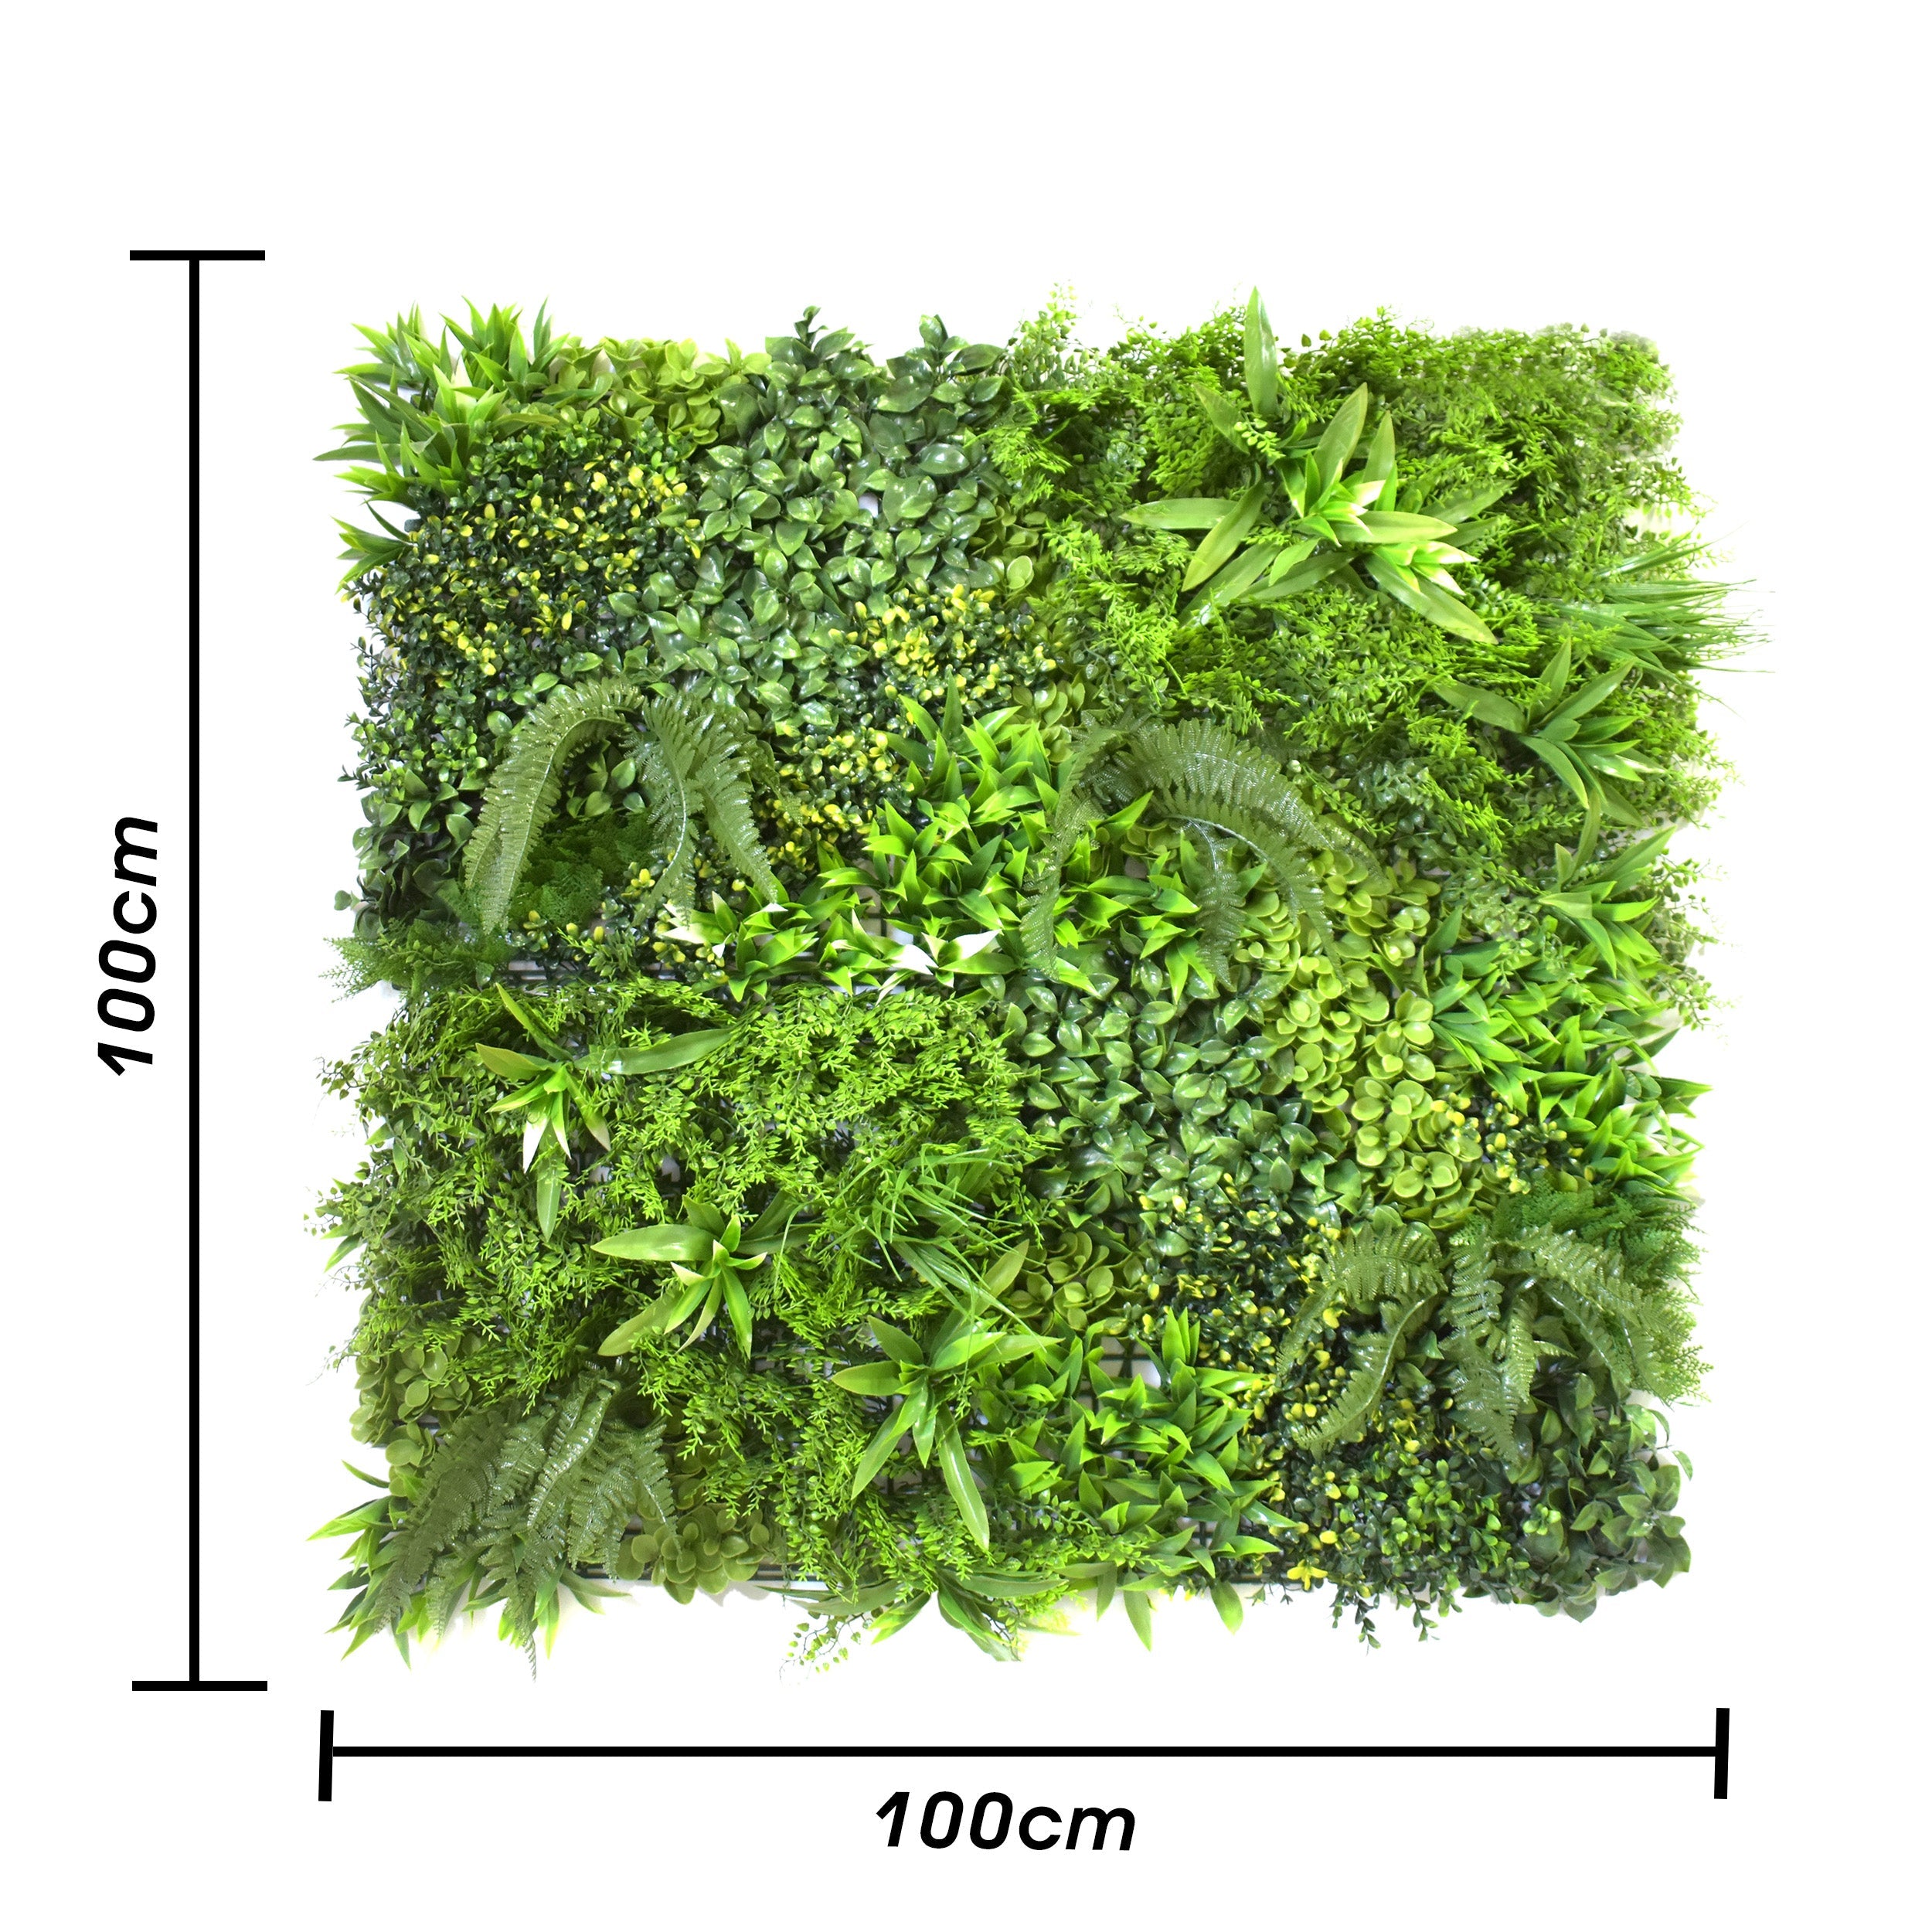 Aavana Greens Artificial Vertical Garden Wall Panel 100X100 CM For Home & Office Decoration 100% UV Indoor And Outdoor Use Option 17